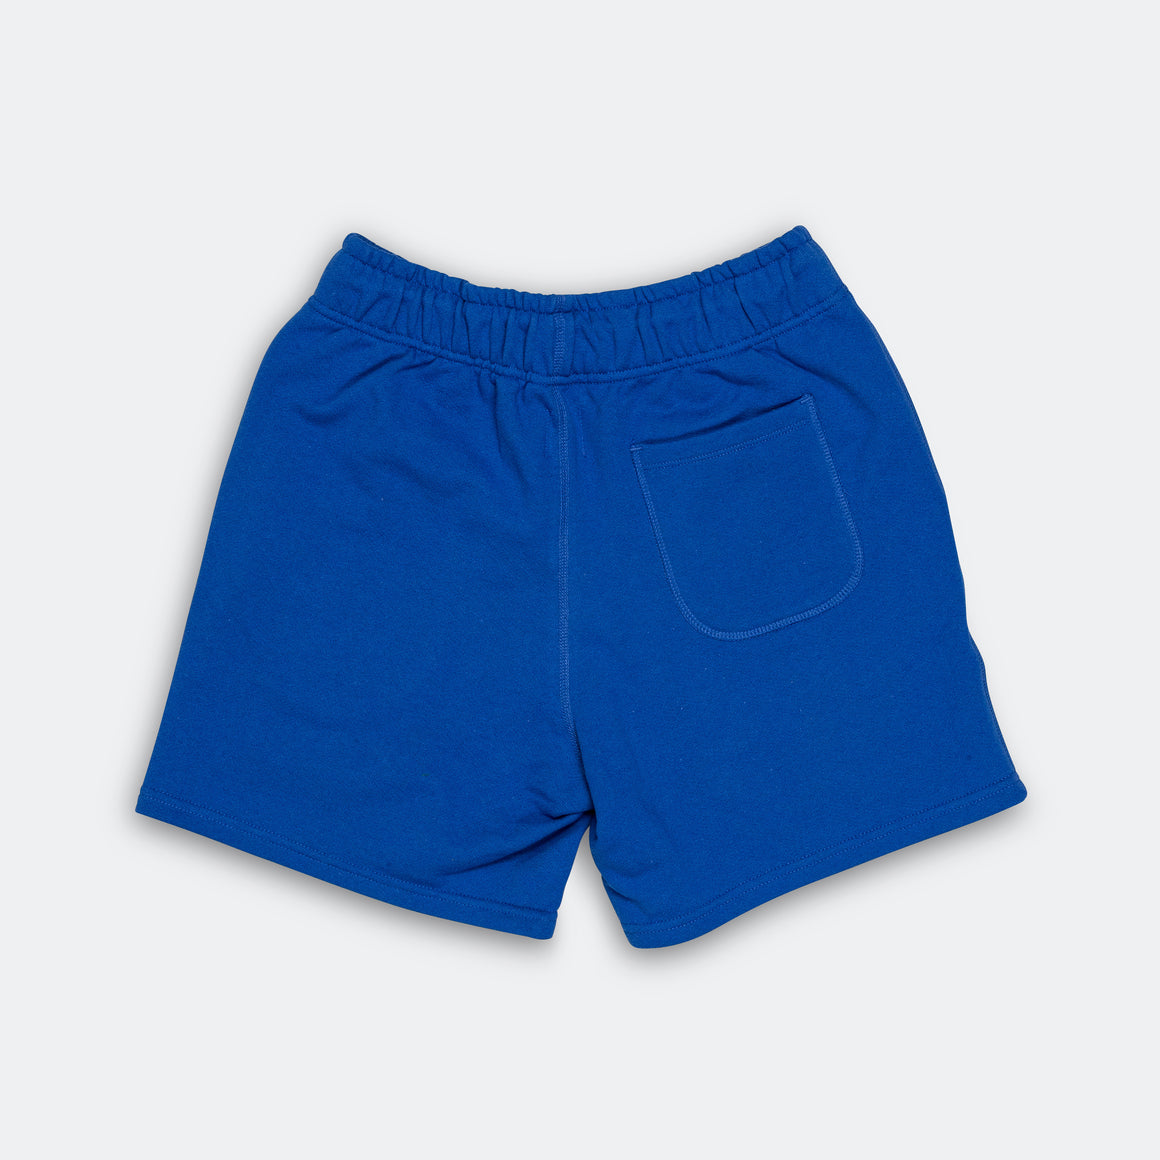 MADE in USA Sweat Short - Team Royal